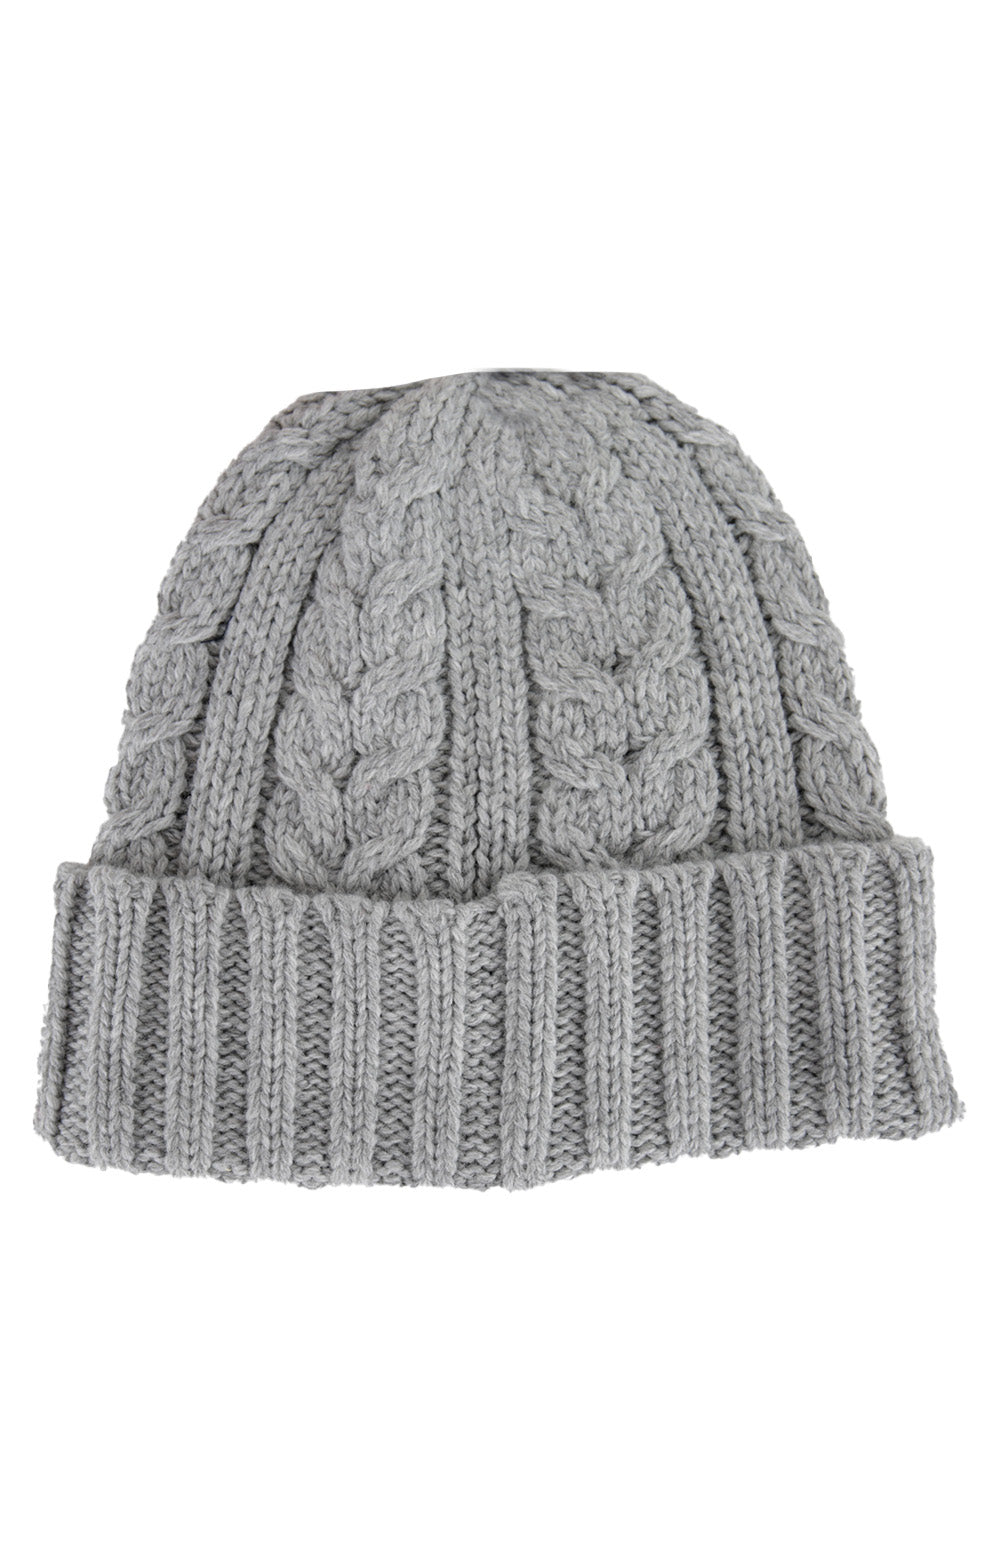 Recycled Cable Beanie - Andover Heather